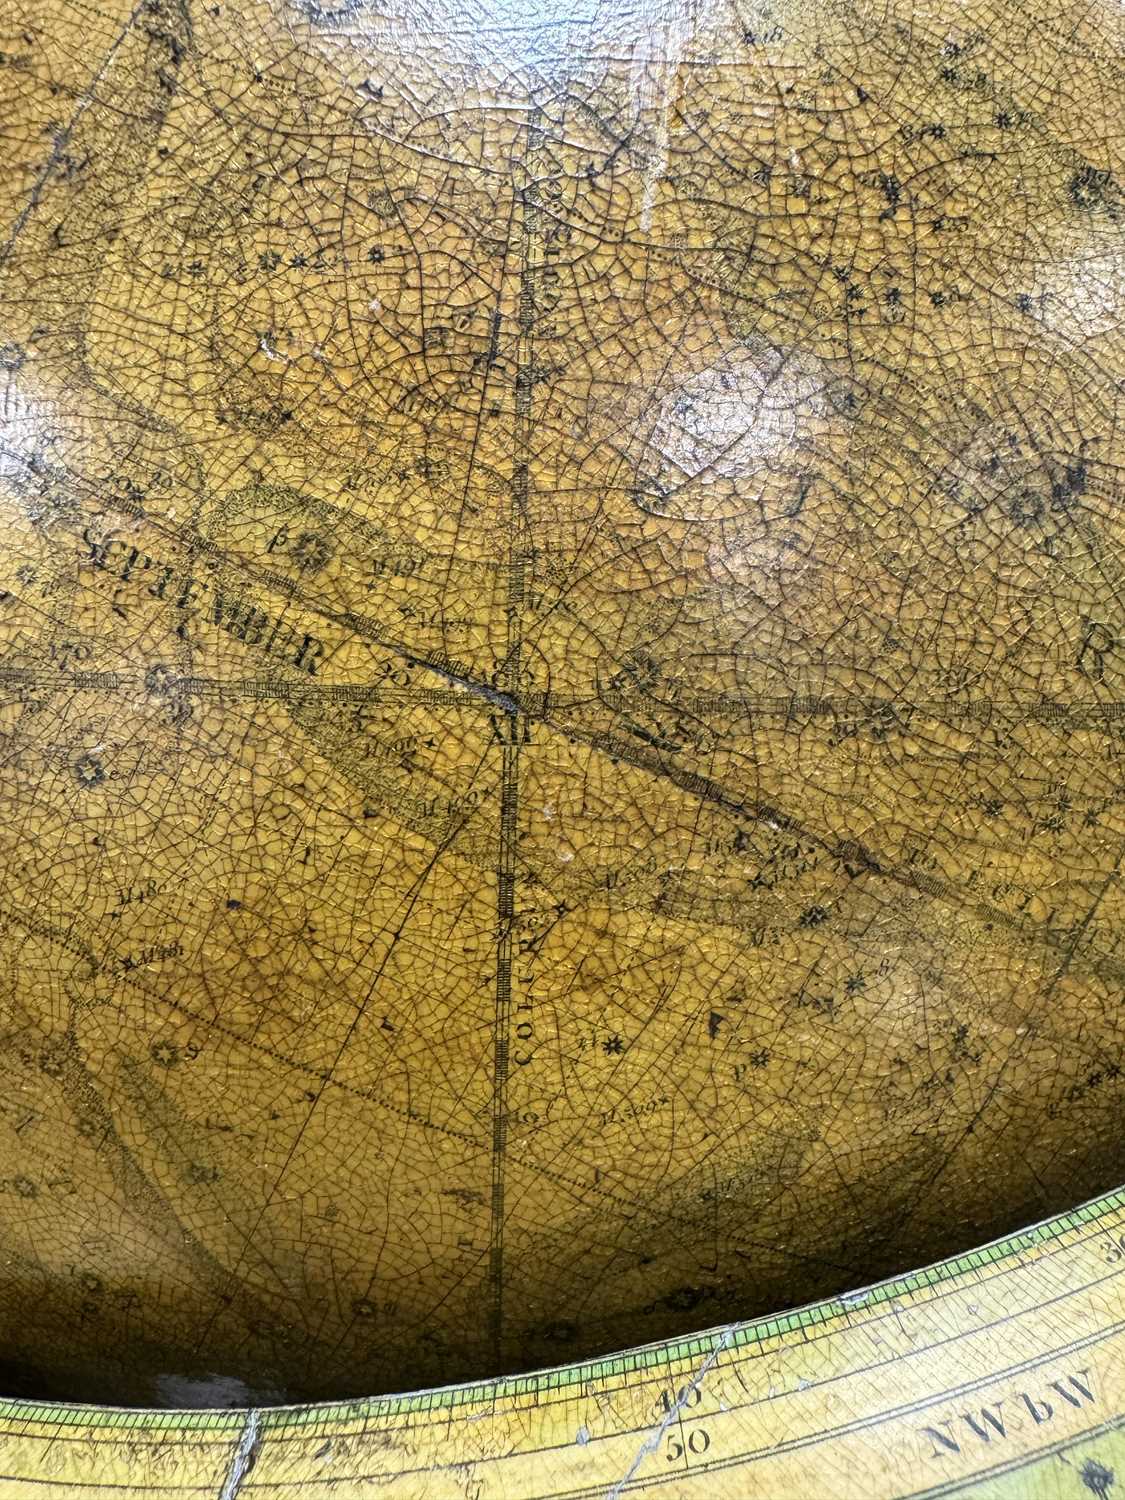 A 19TH CENTURY 15” CARY CELESTIAL LIBRARY GLOBE - Image 10 of 14